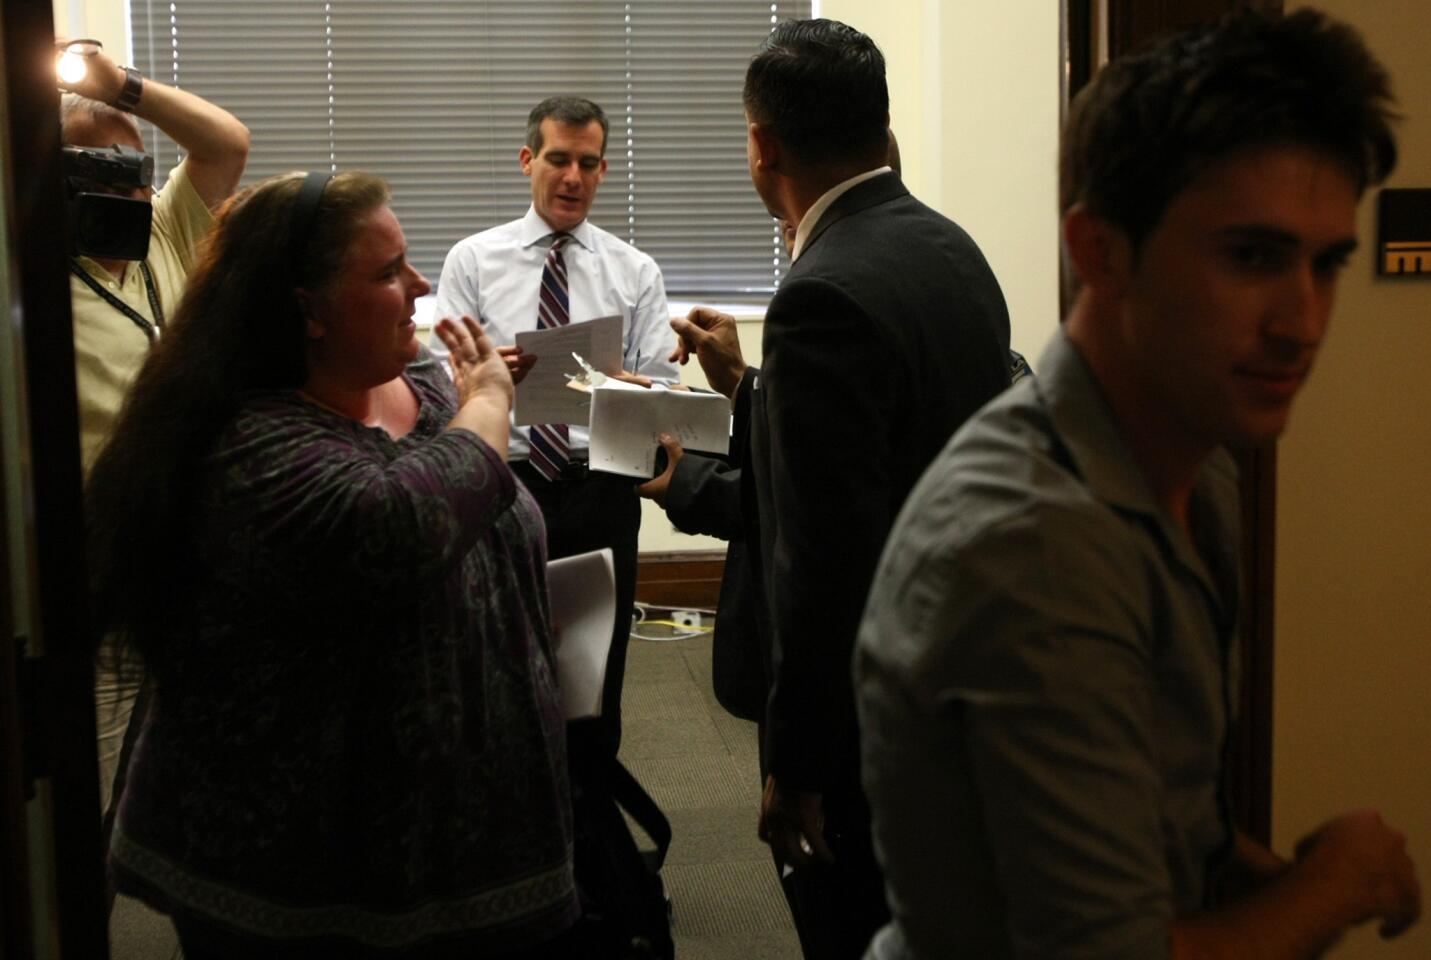 Los Angeles Mayor Eric Garcetti looks to see who his next appointment is after meeting with constituents Amanda Alonso, left, and Michael Konowitz, right. They visited the mayor at his City Hall office to discuss the benefits of the ride-sharing service Lyft.